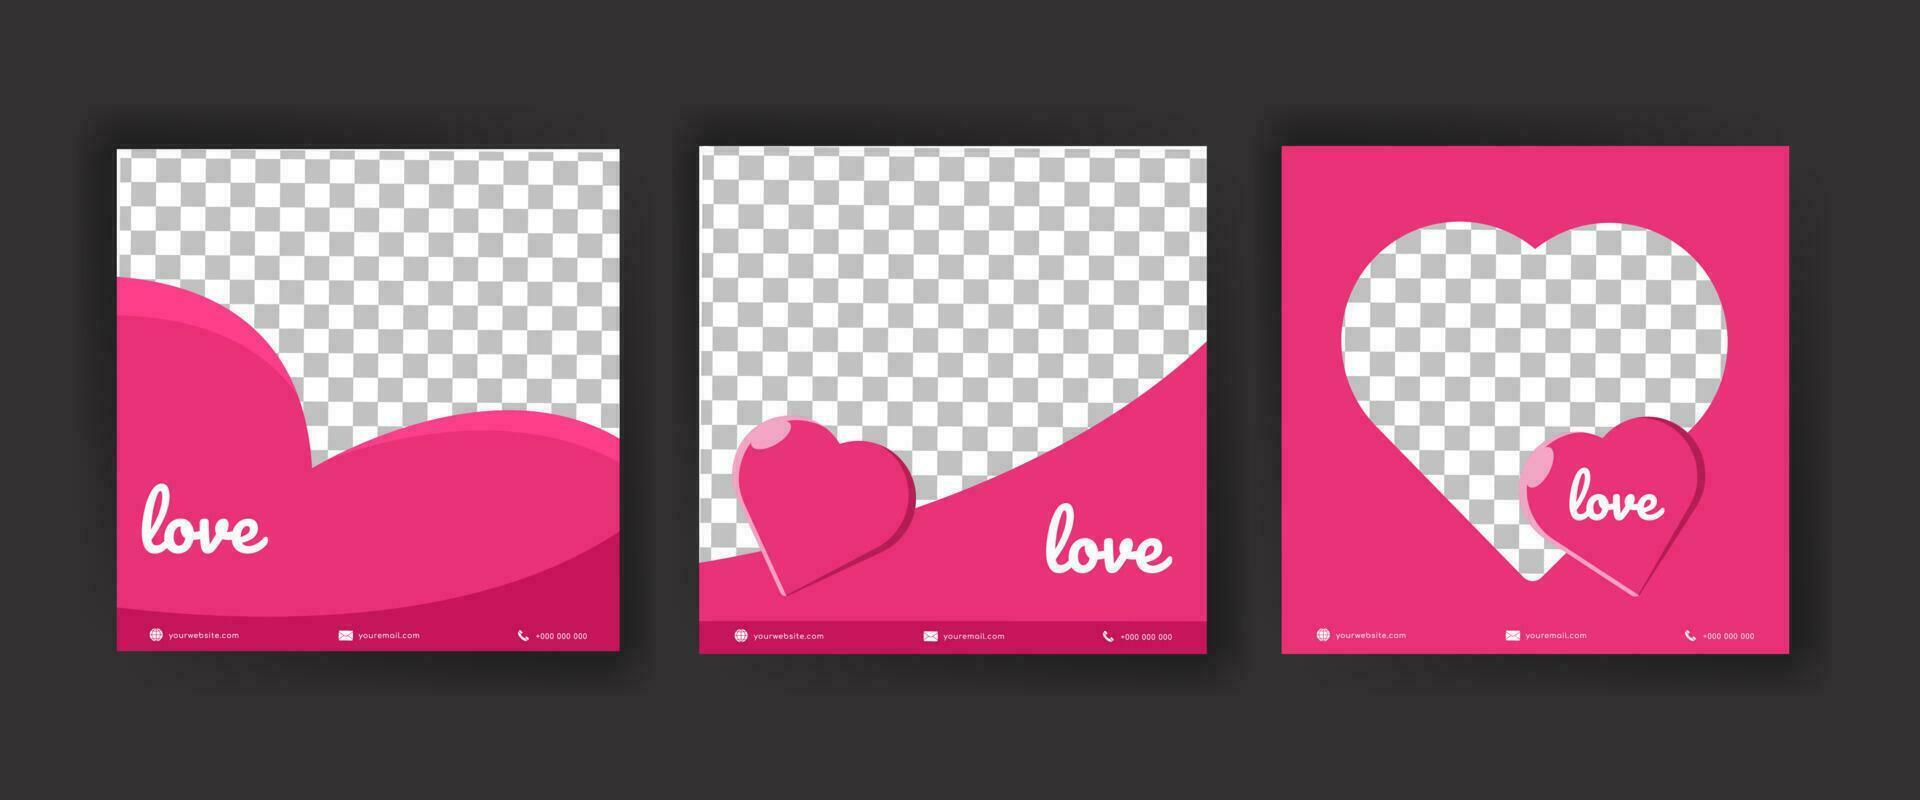 Set Of Digital business marketing banner for social media post template. Red Pink Color Background. Love, Valentine Theme. Suitable for social media posts and web advertising vector